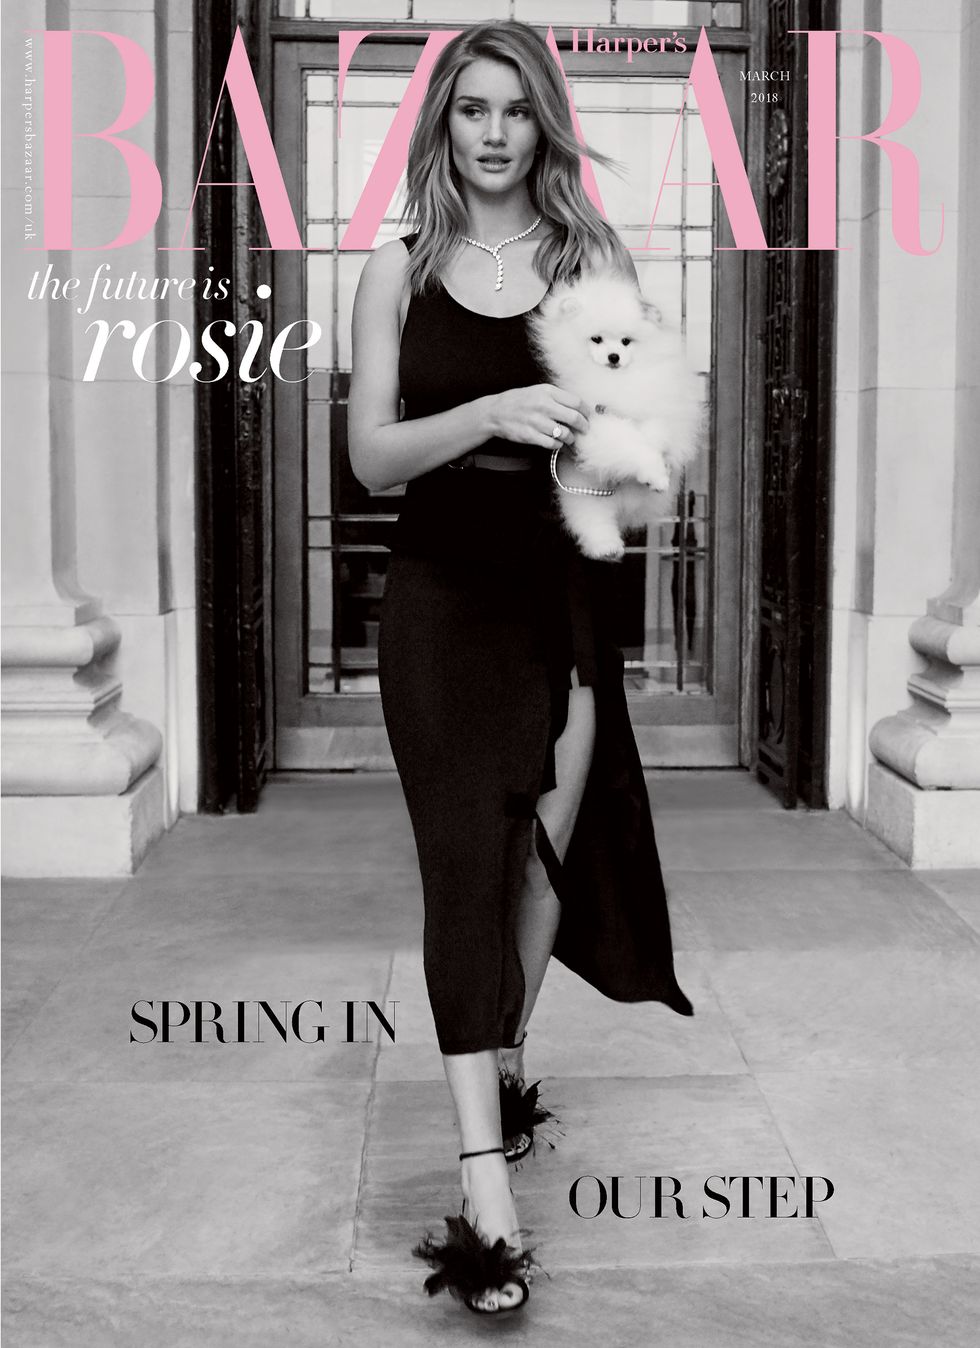 Rosie Huntington-Whiteley for Harper's Bazaar March 2018 issue cover